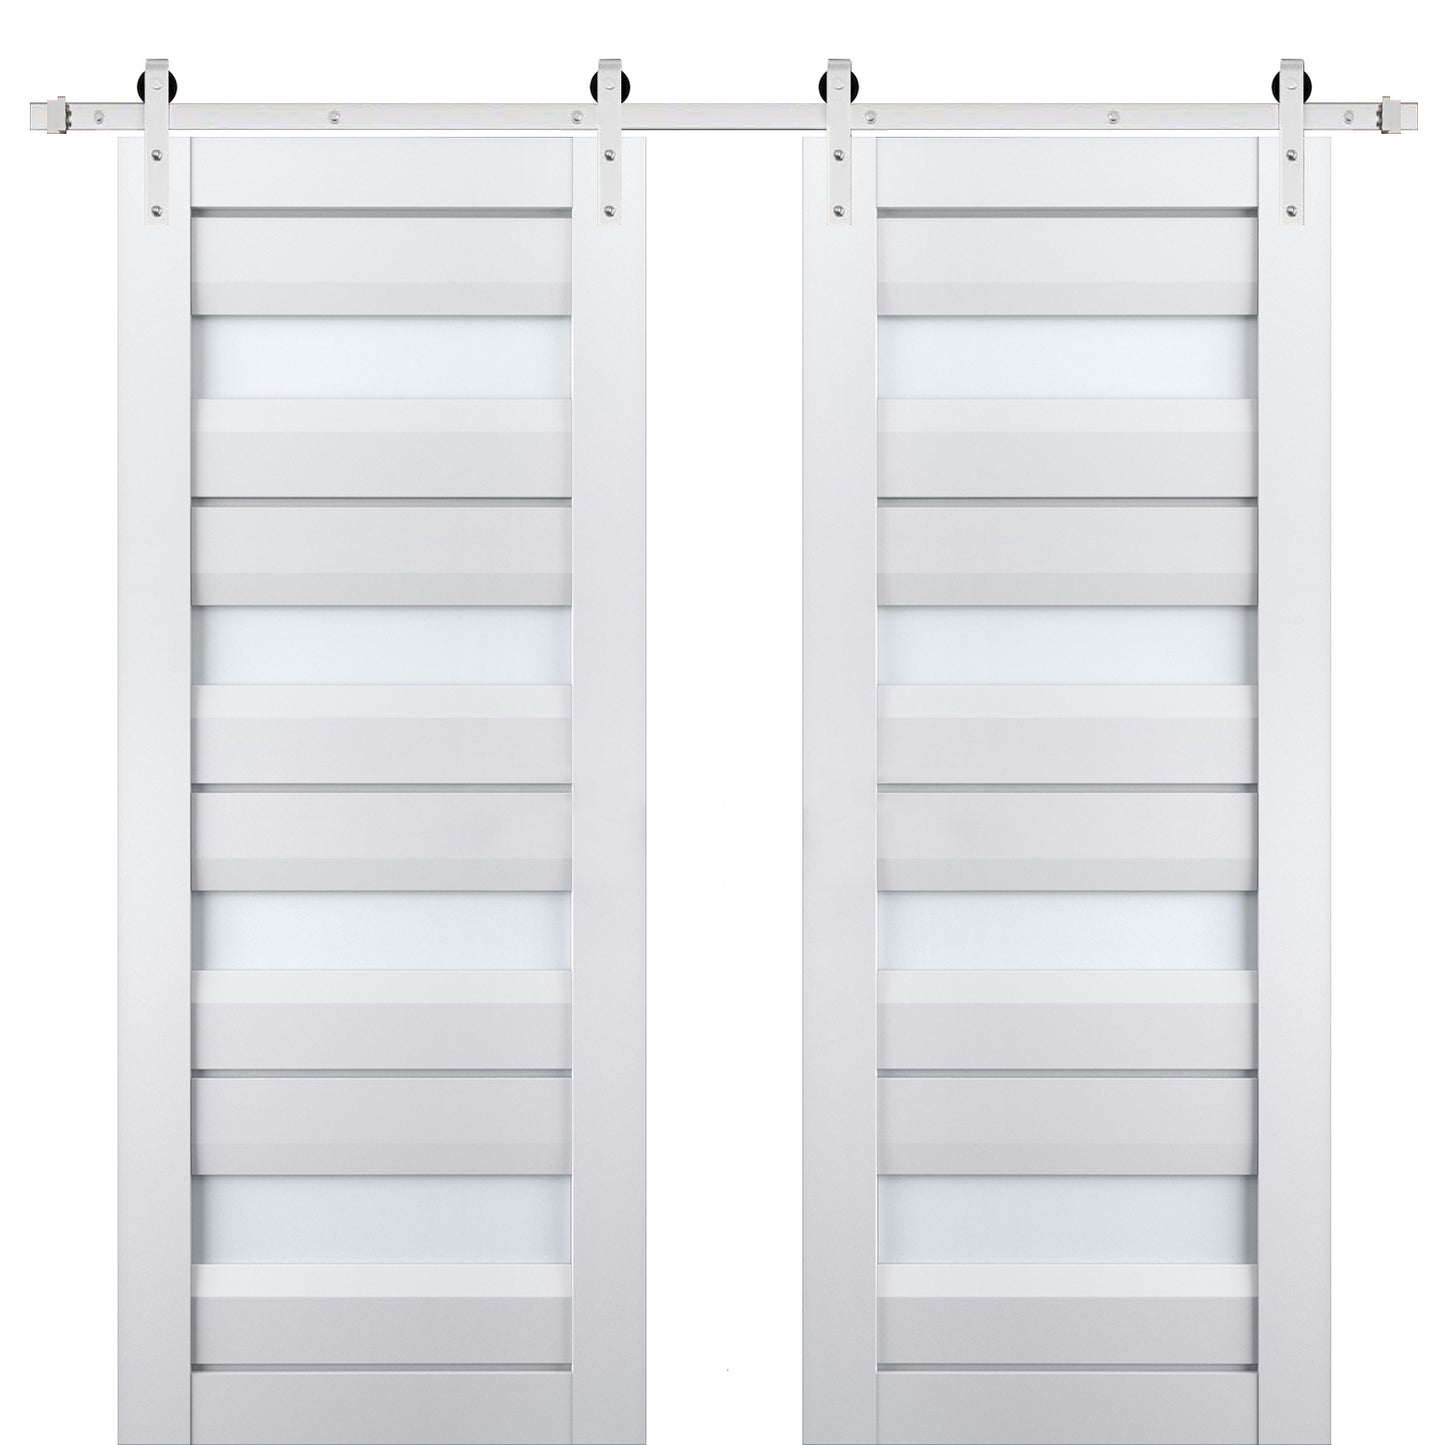 Veregio 7455 Matte White Double Barn Door with Frosted Glass and Silver Finish Rail